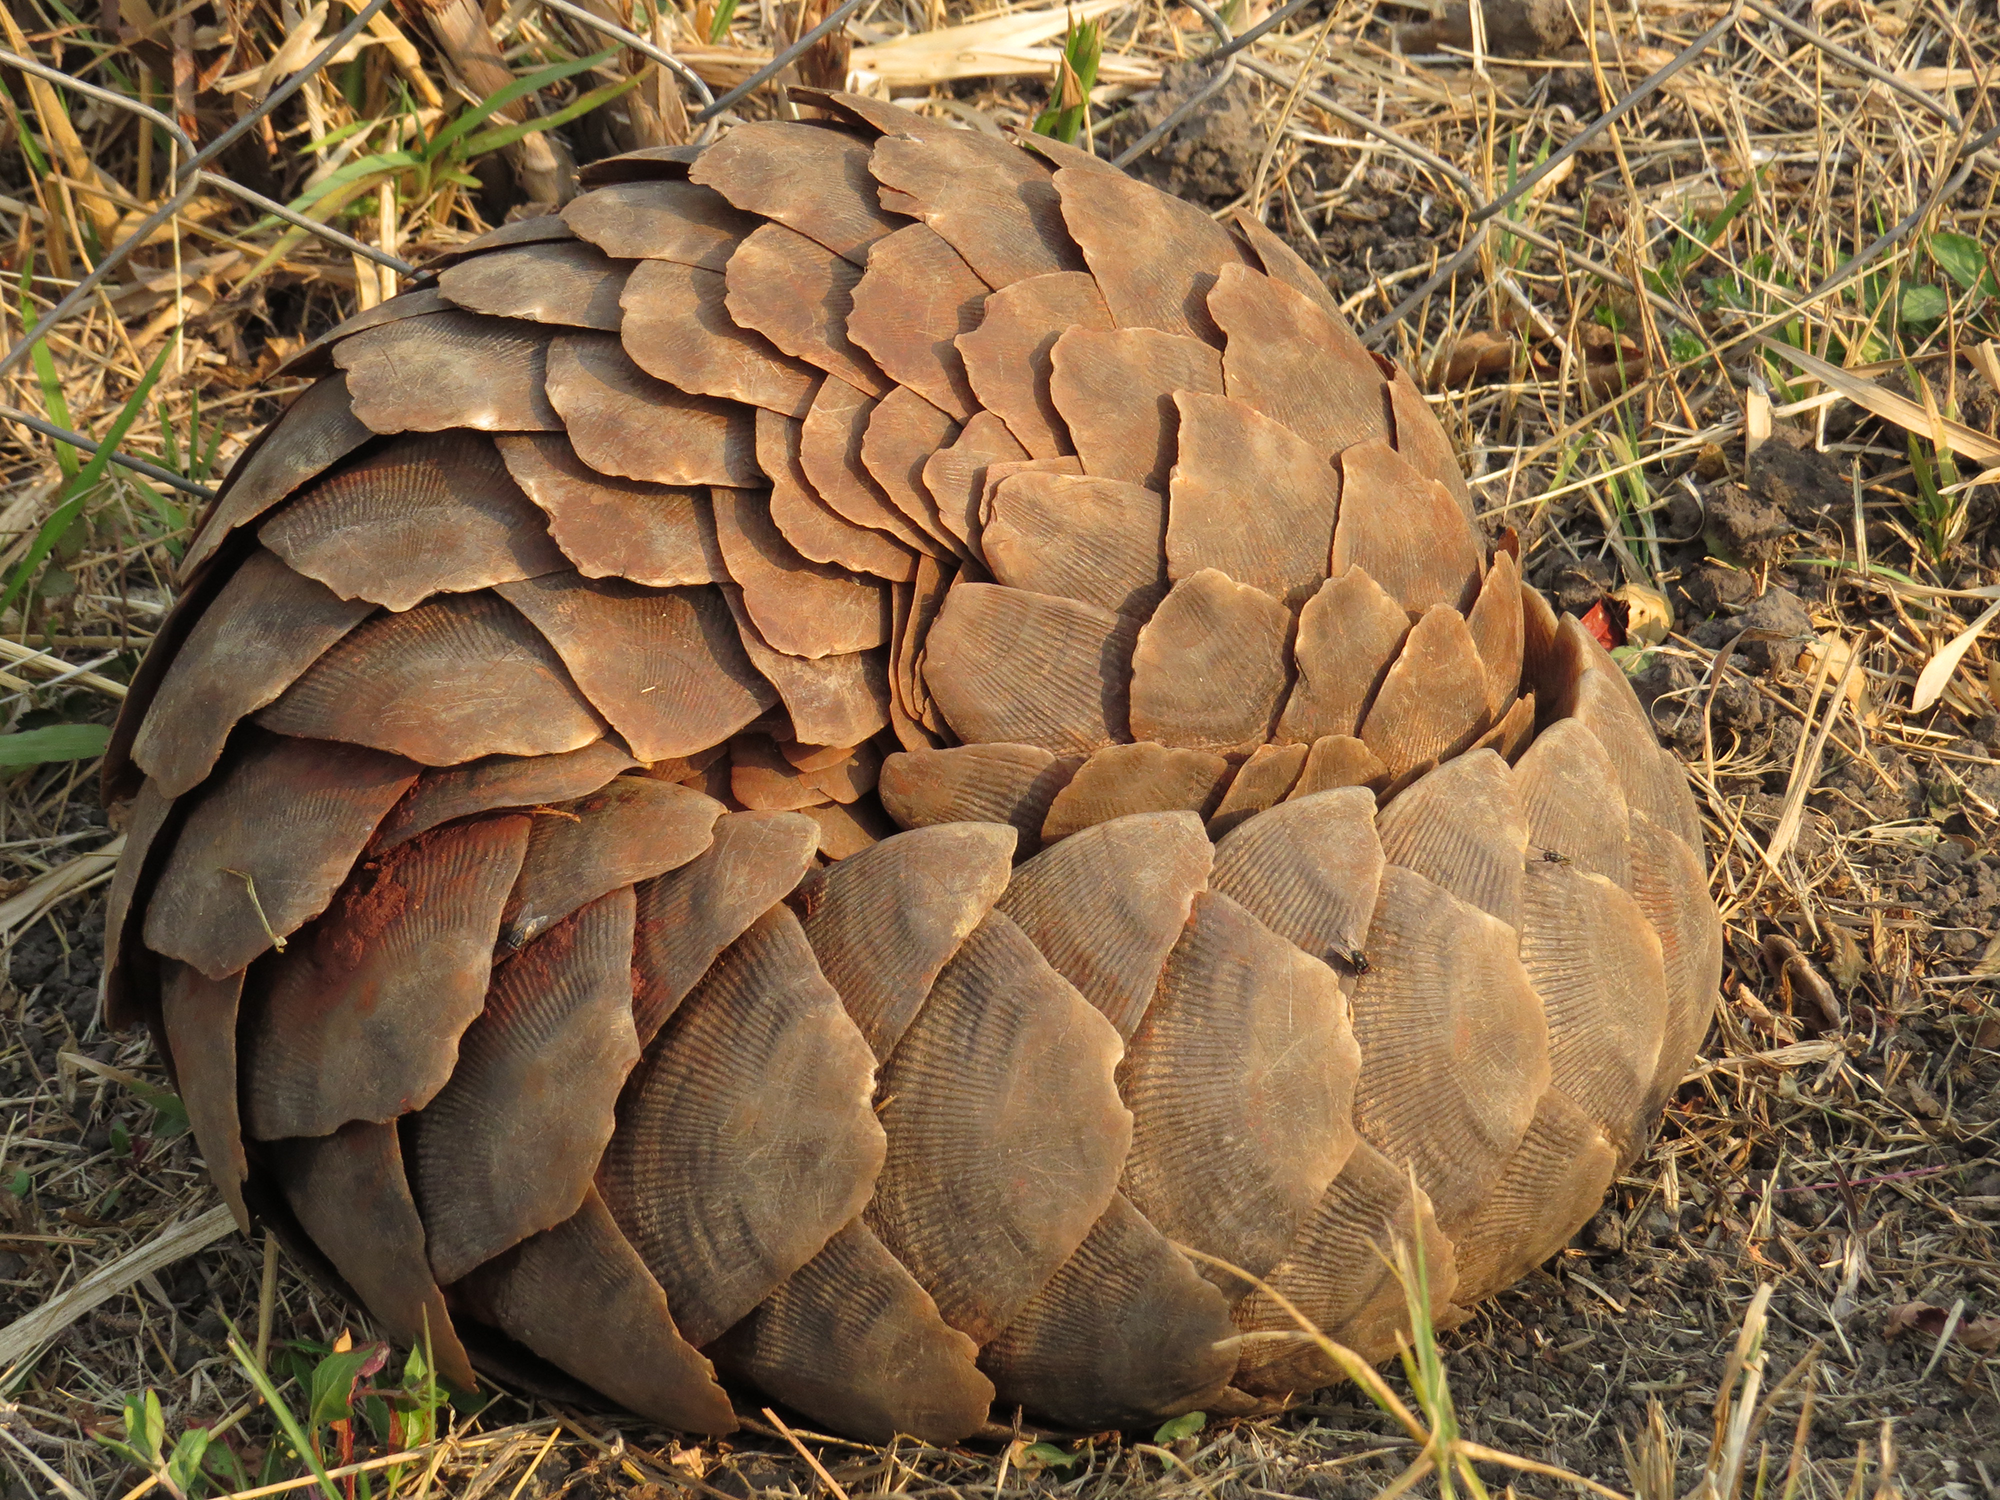 Living on Earth: At Risk the Pangolin- A Mammal With Scales2000 x 1500